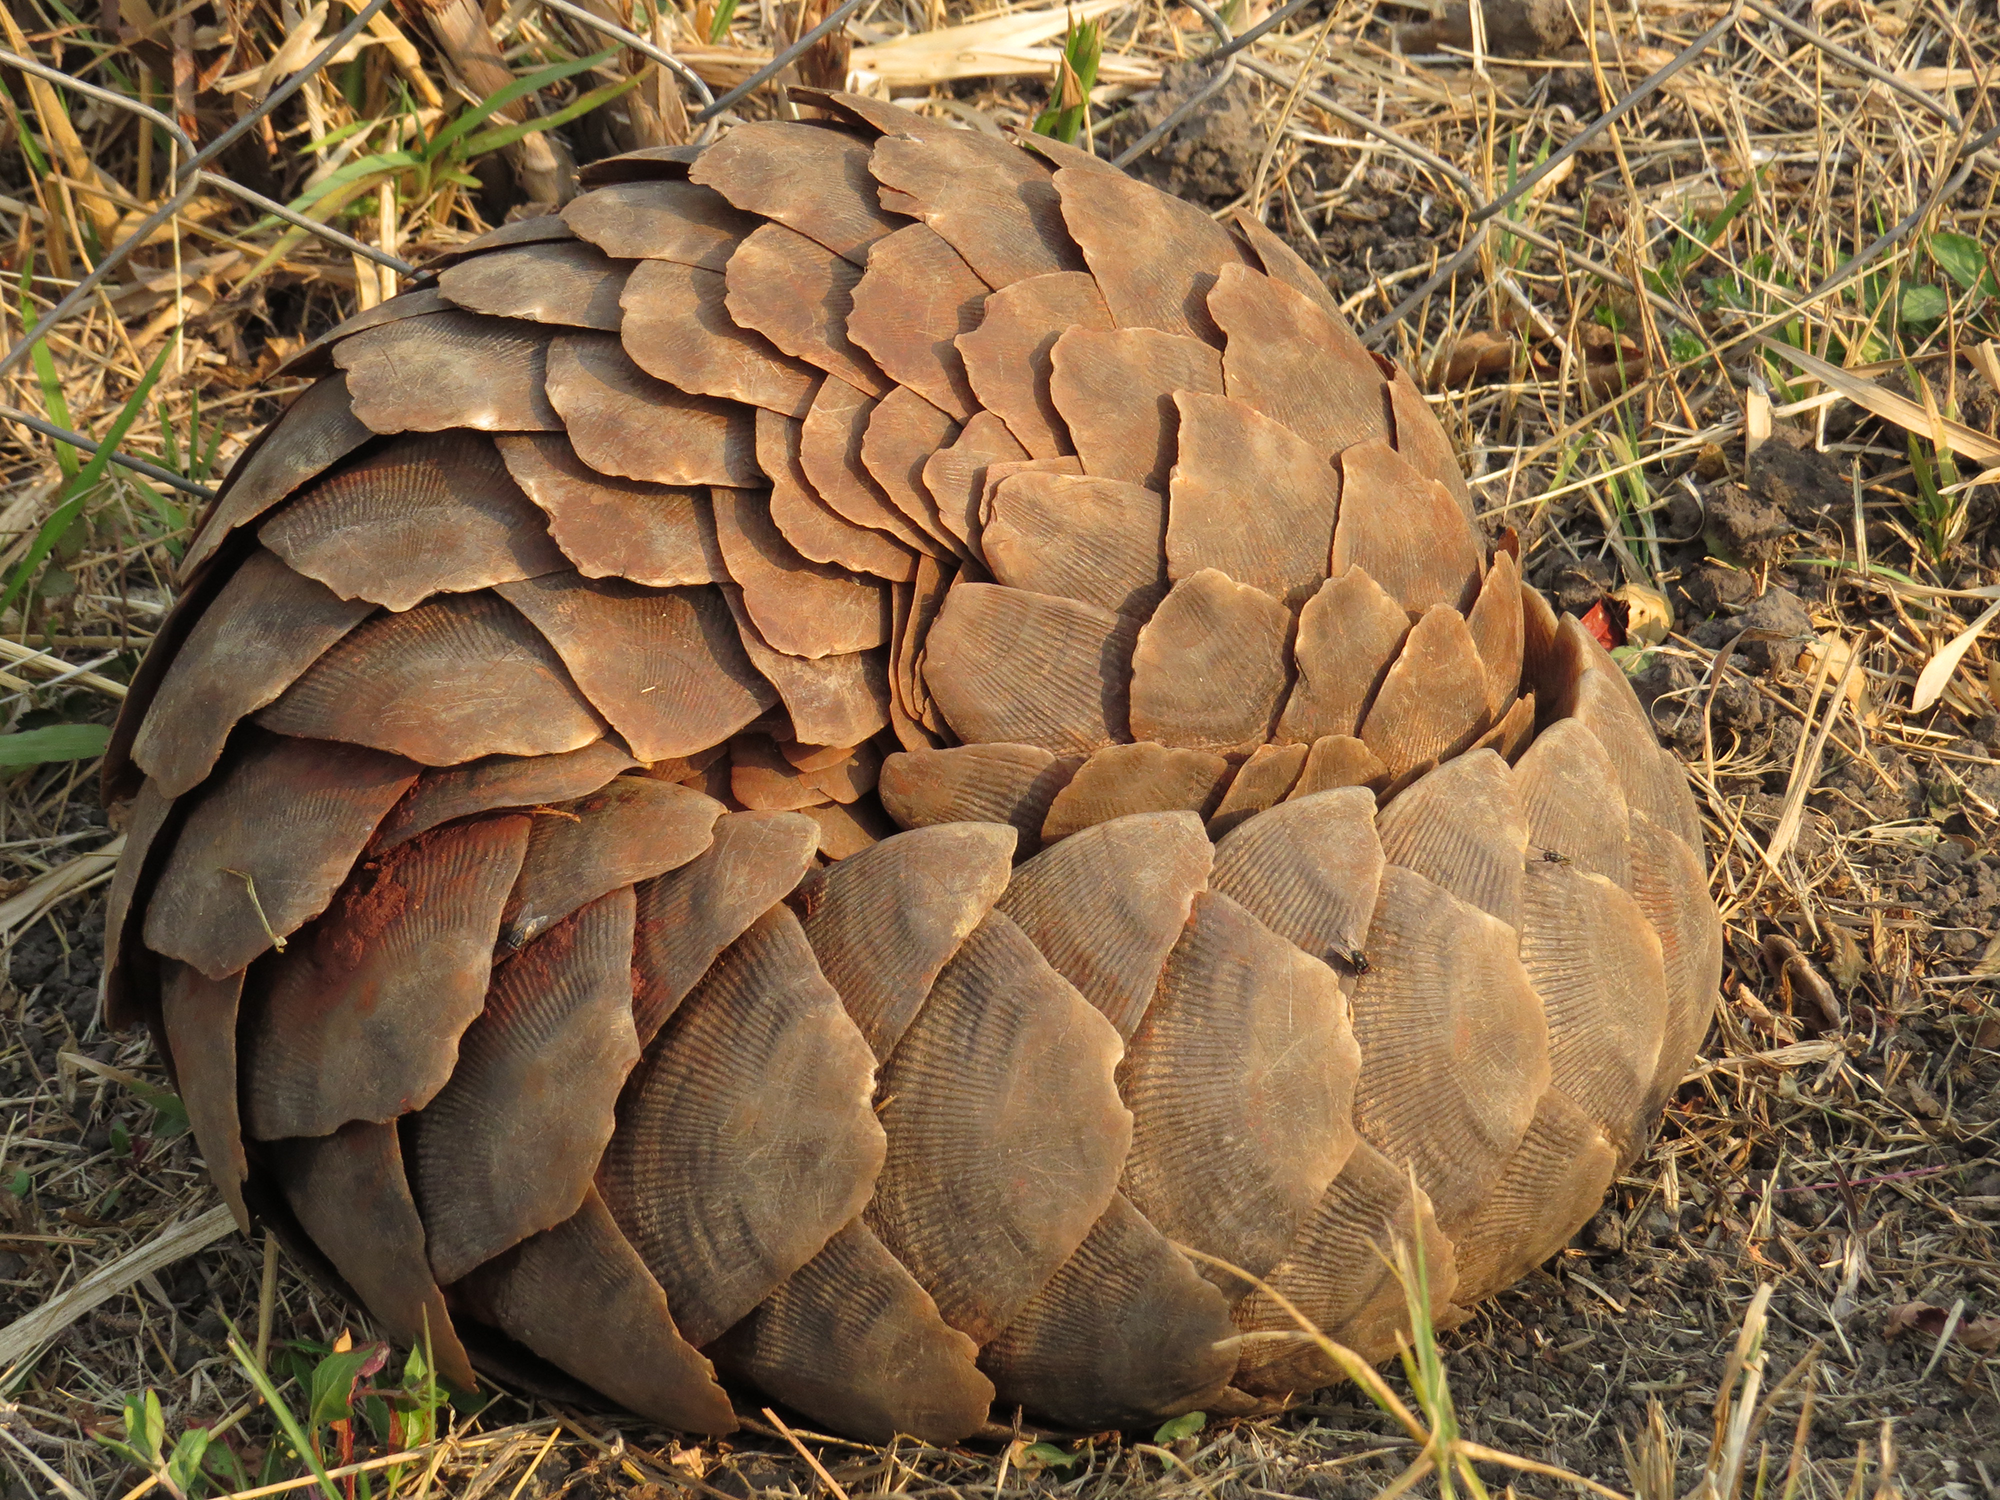 Living on Earth: At Risk the Pangolin- A Mammal With Scales2000 x 1500